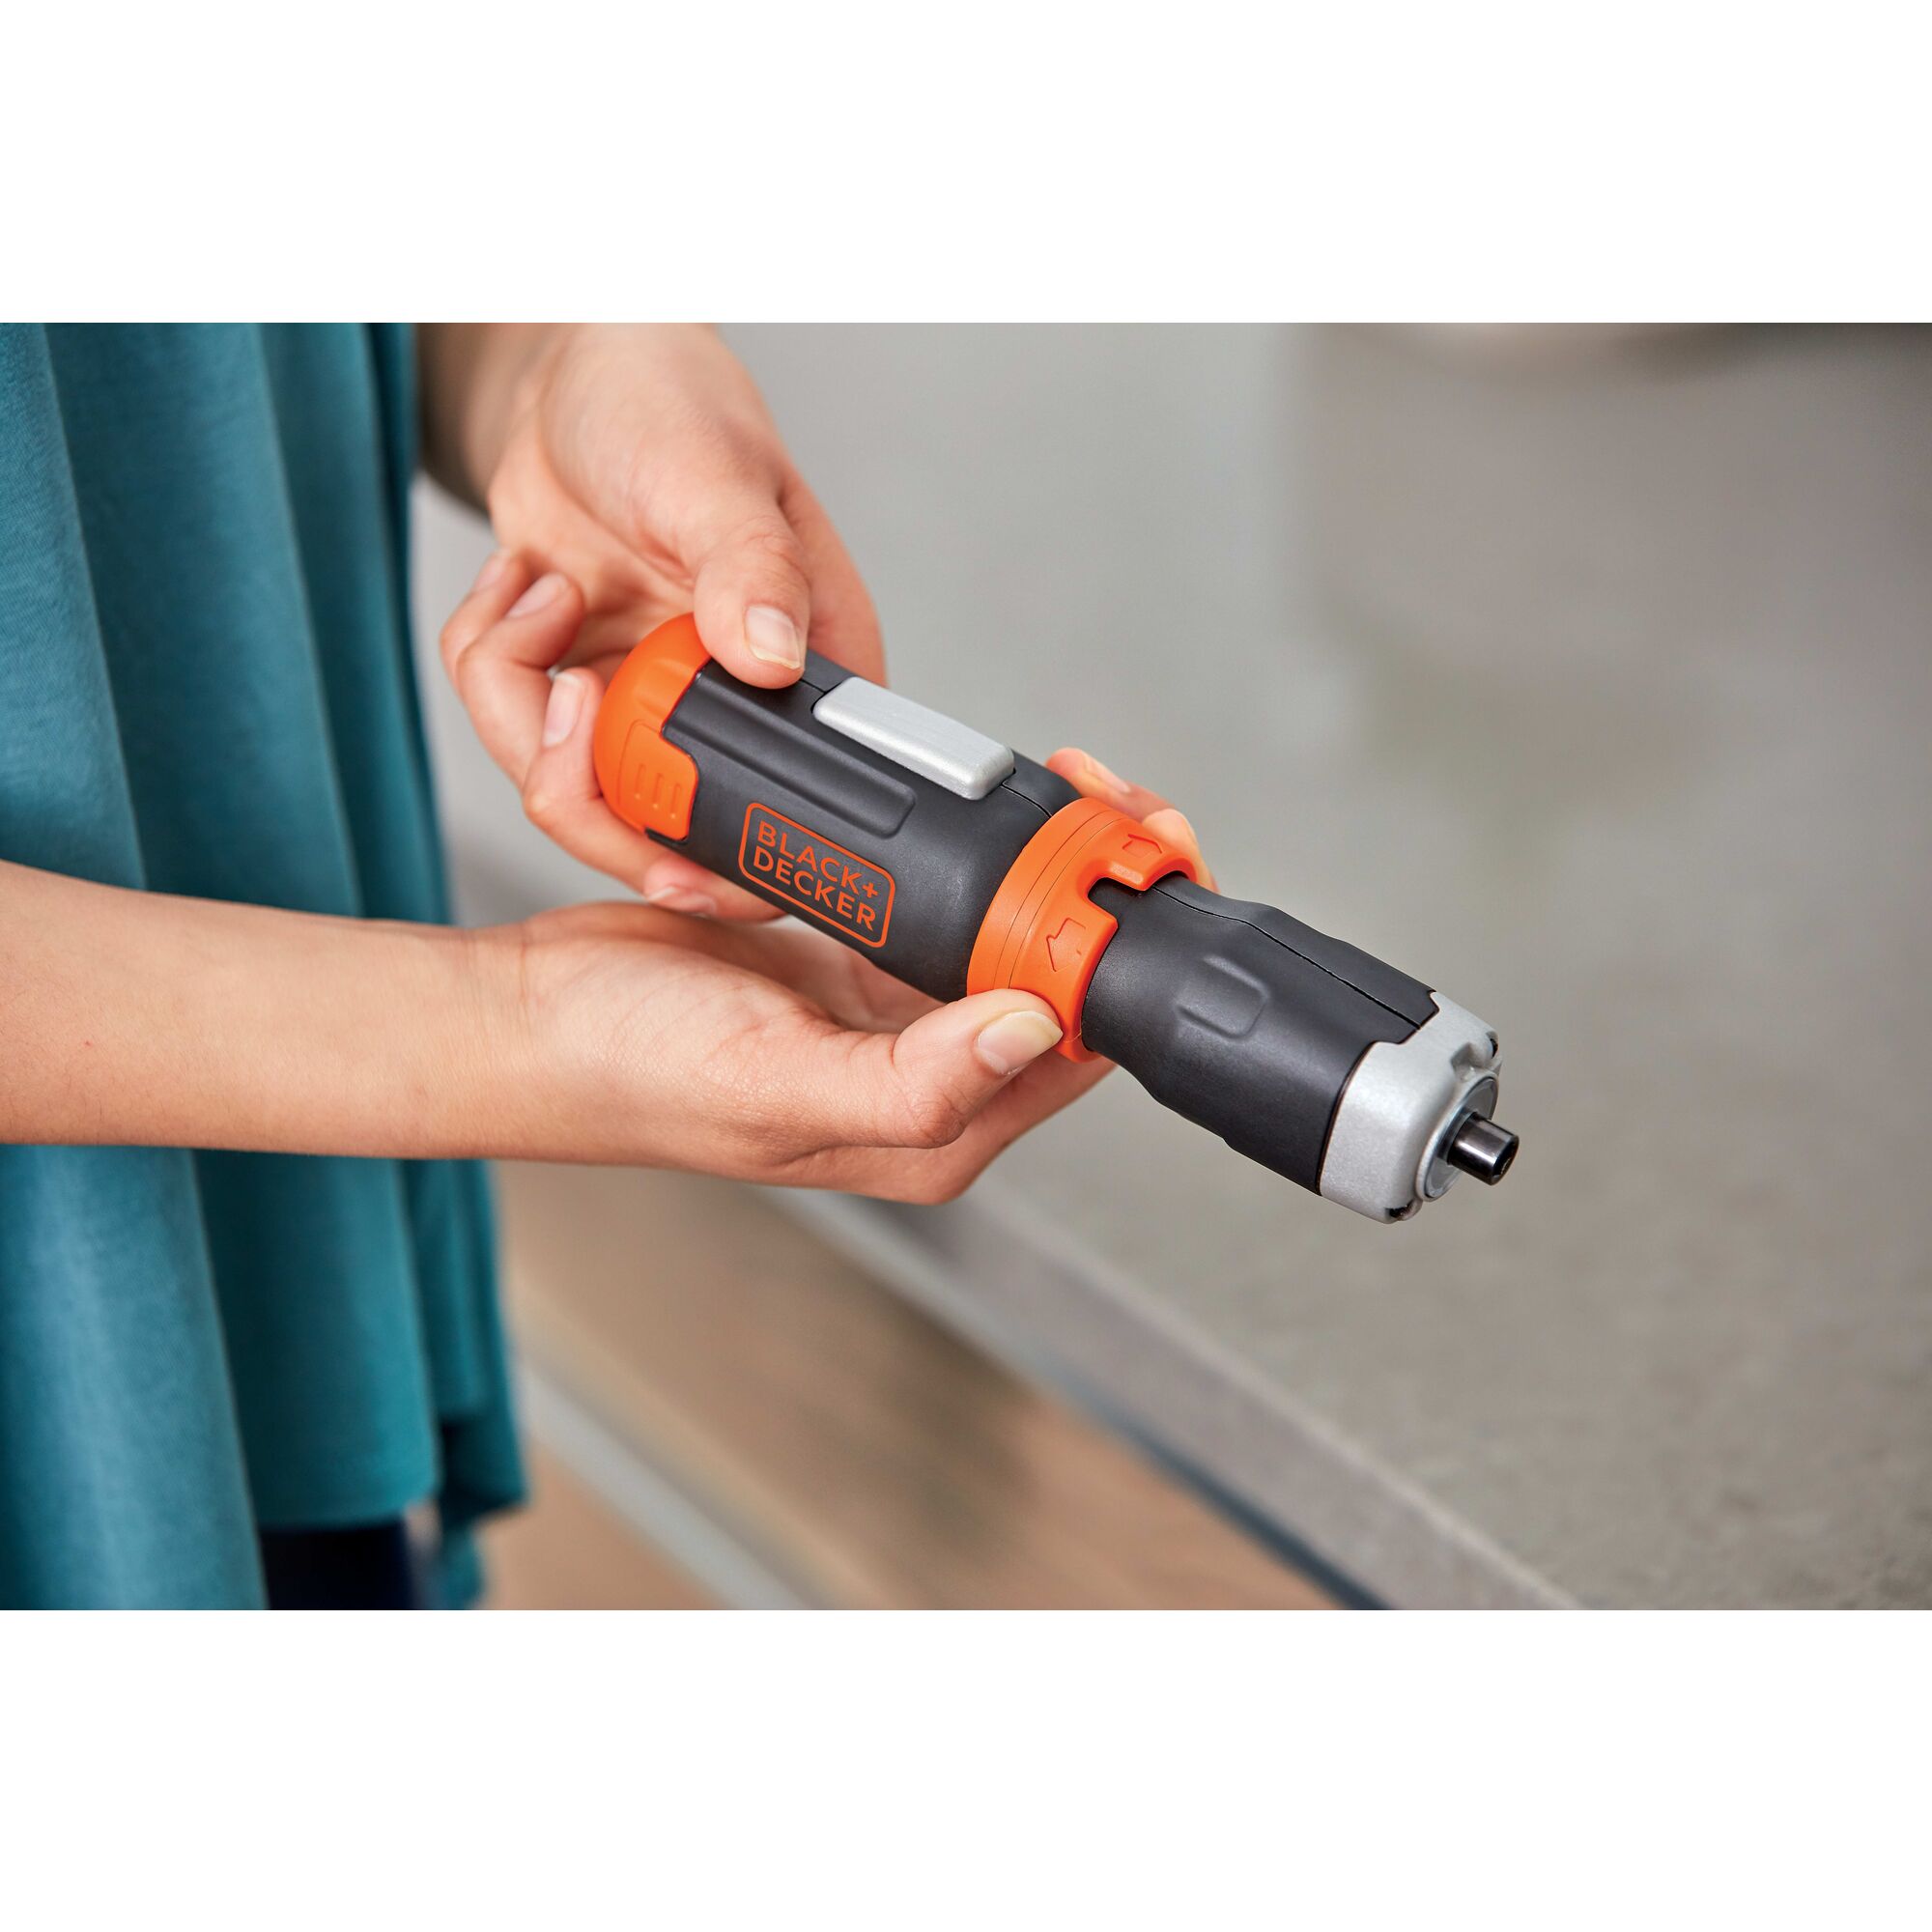 Extension shaft feature of Cordless Power Driver Screwdriver.